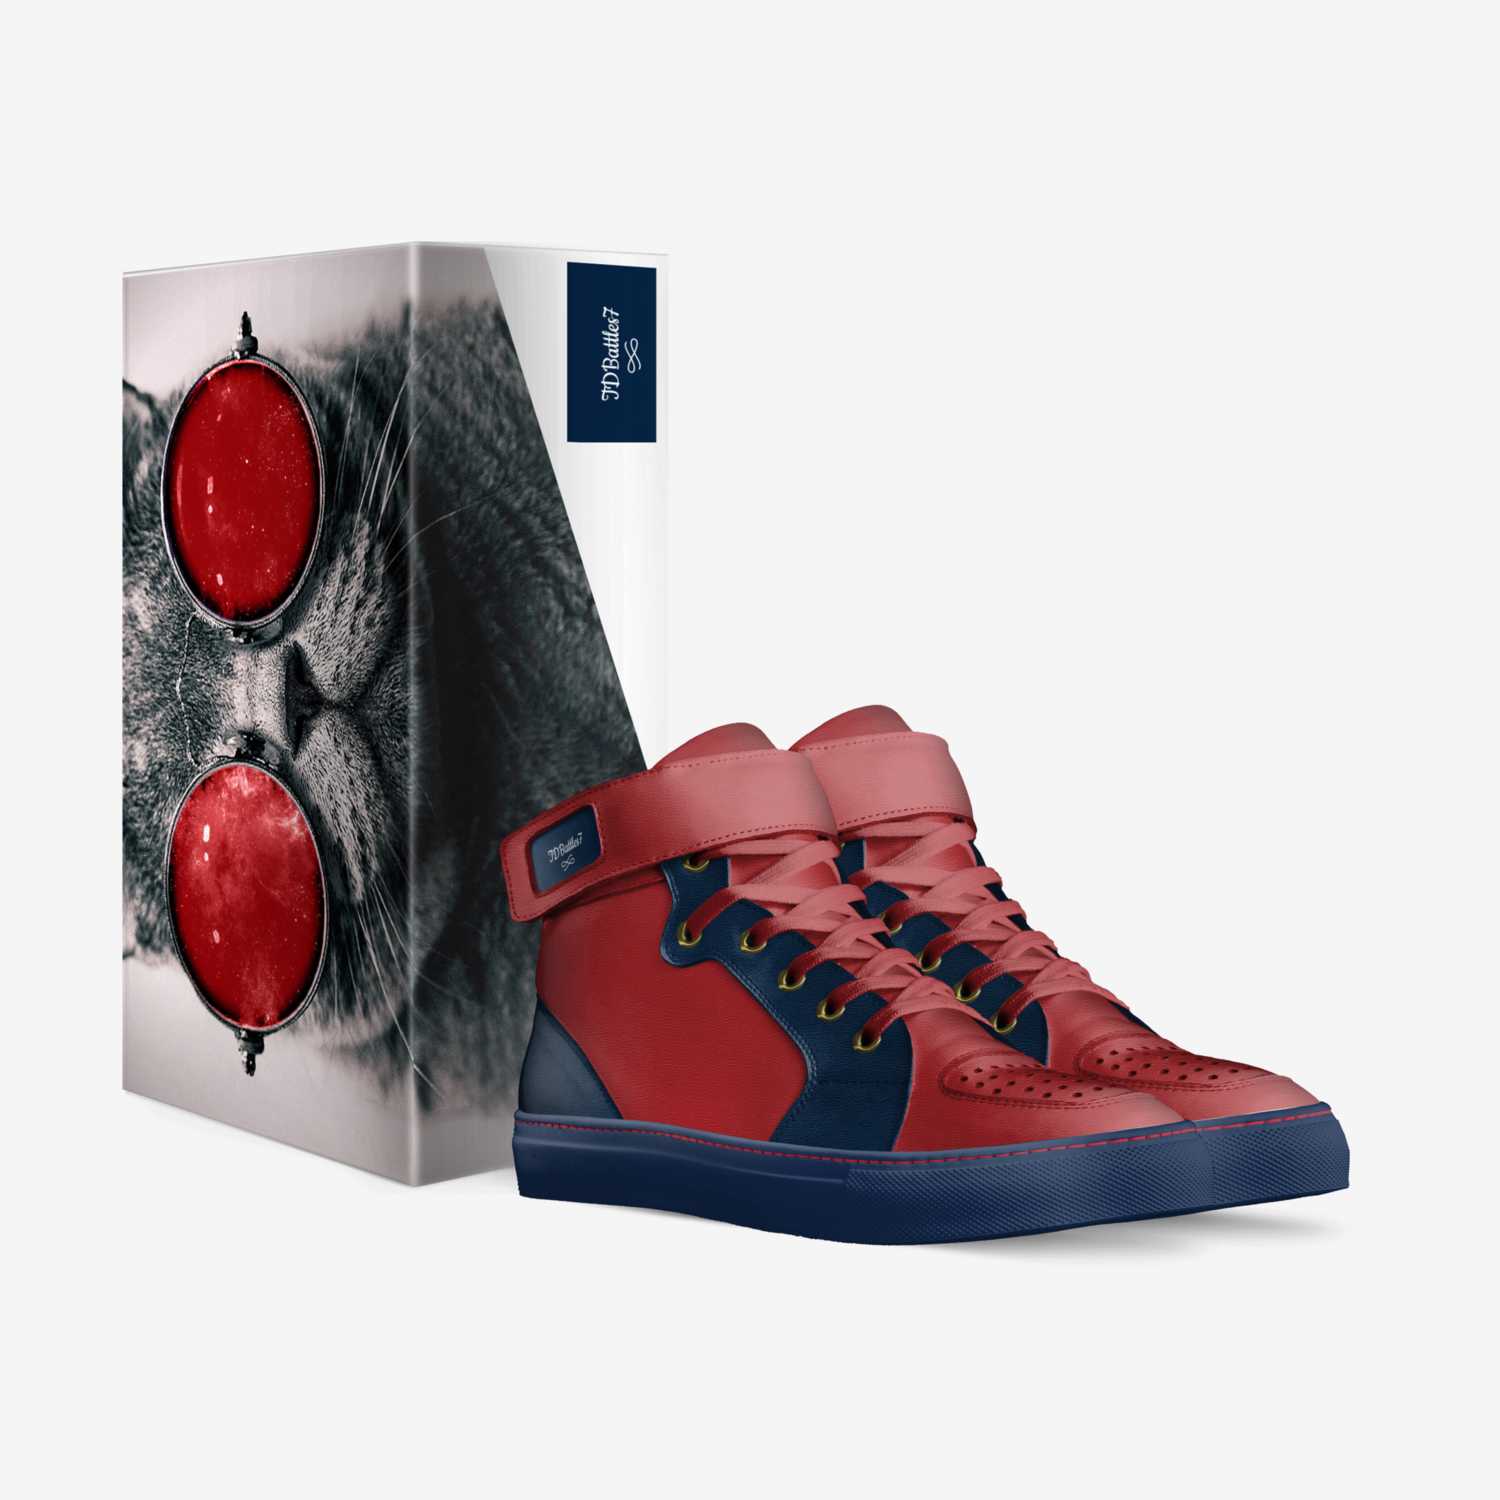 TDBattles7 custom made in Italy shoes by Brody Winton | Box view